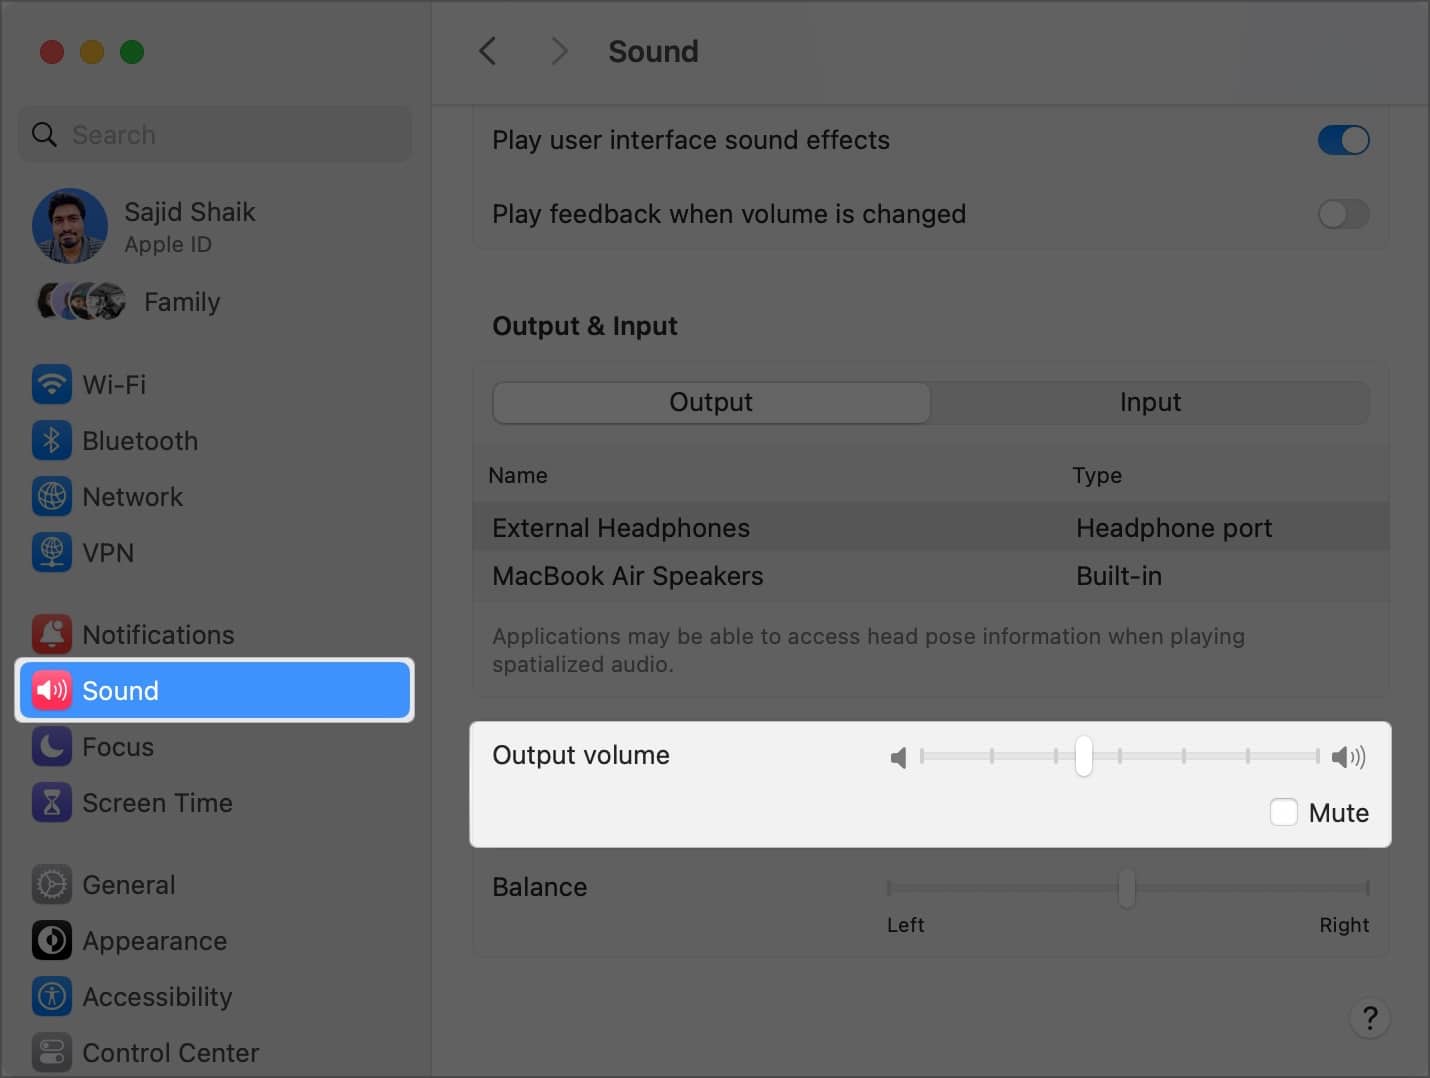 Go to Sound and check Output volume on Mac